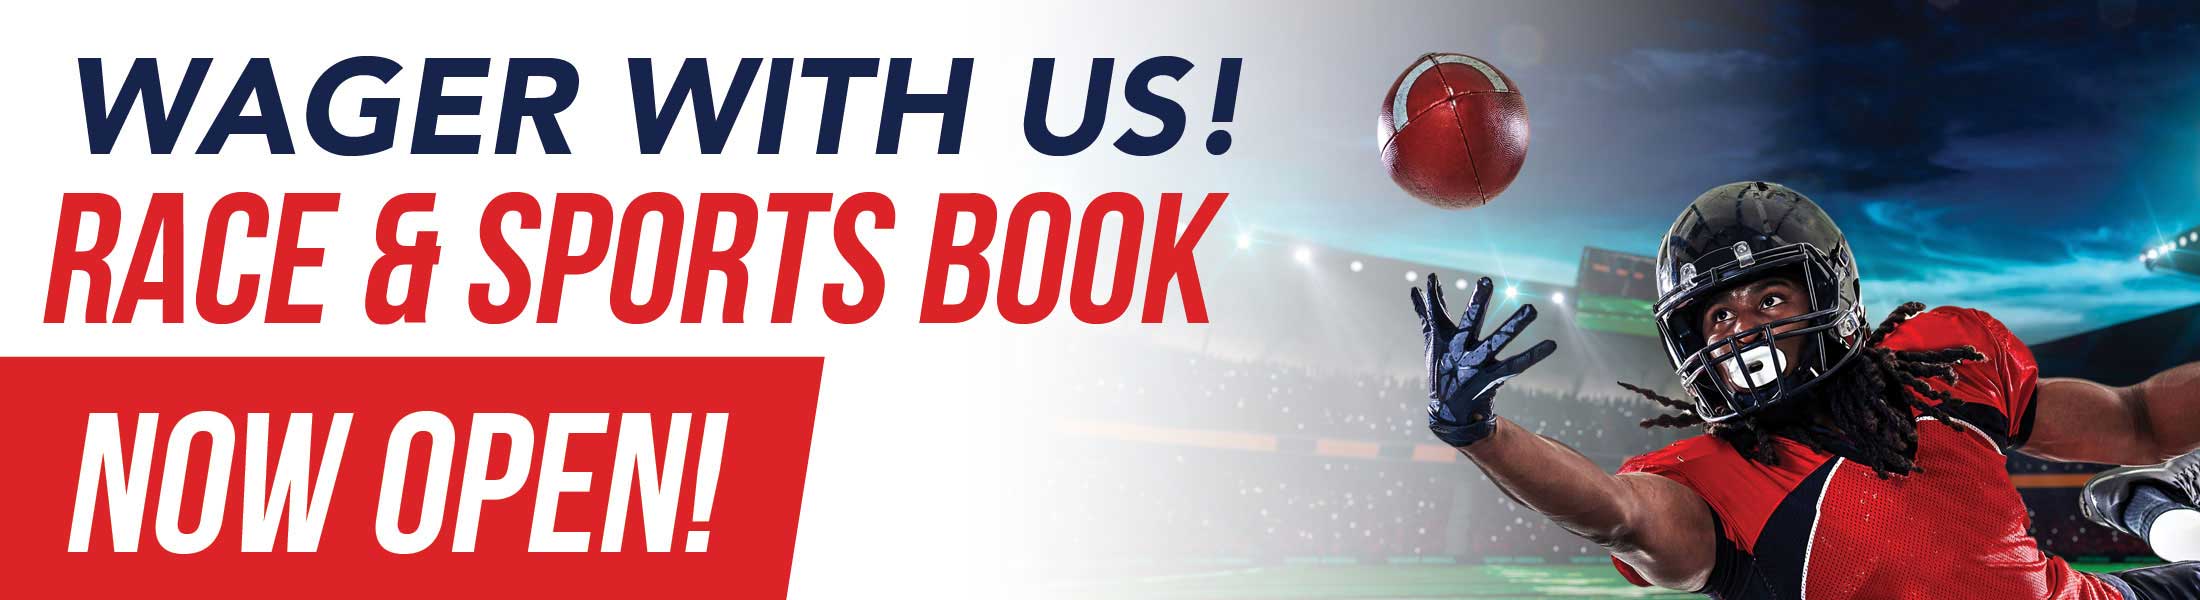 Wager With Us! Race & Sports Book NOW OPEN!